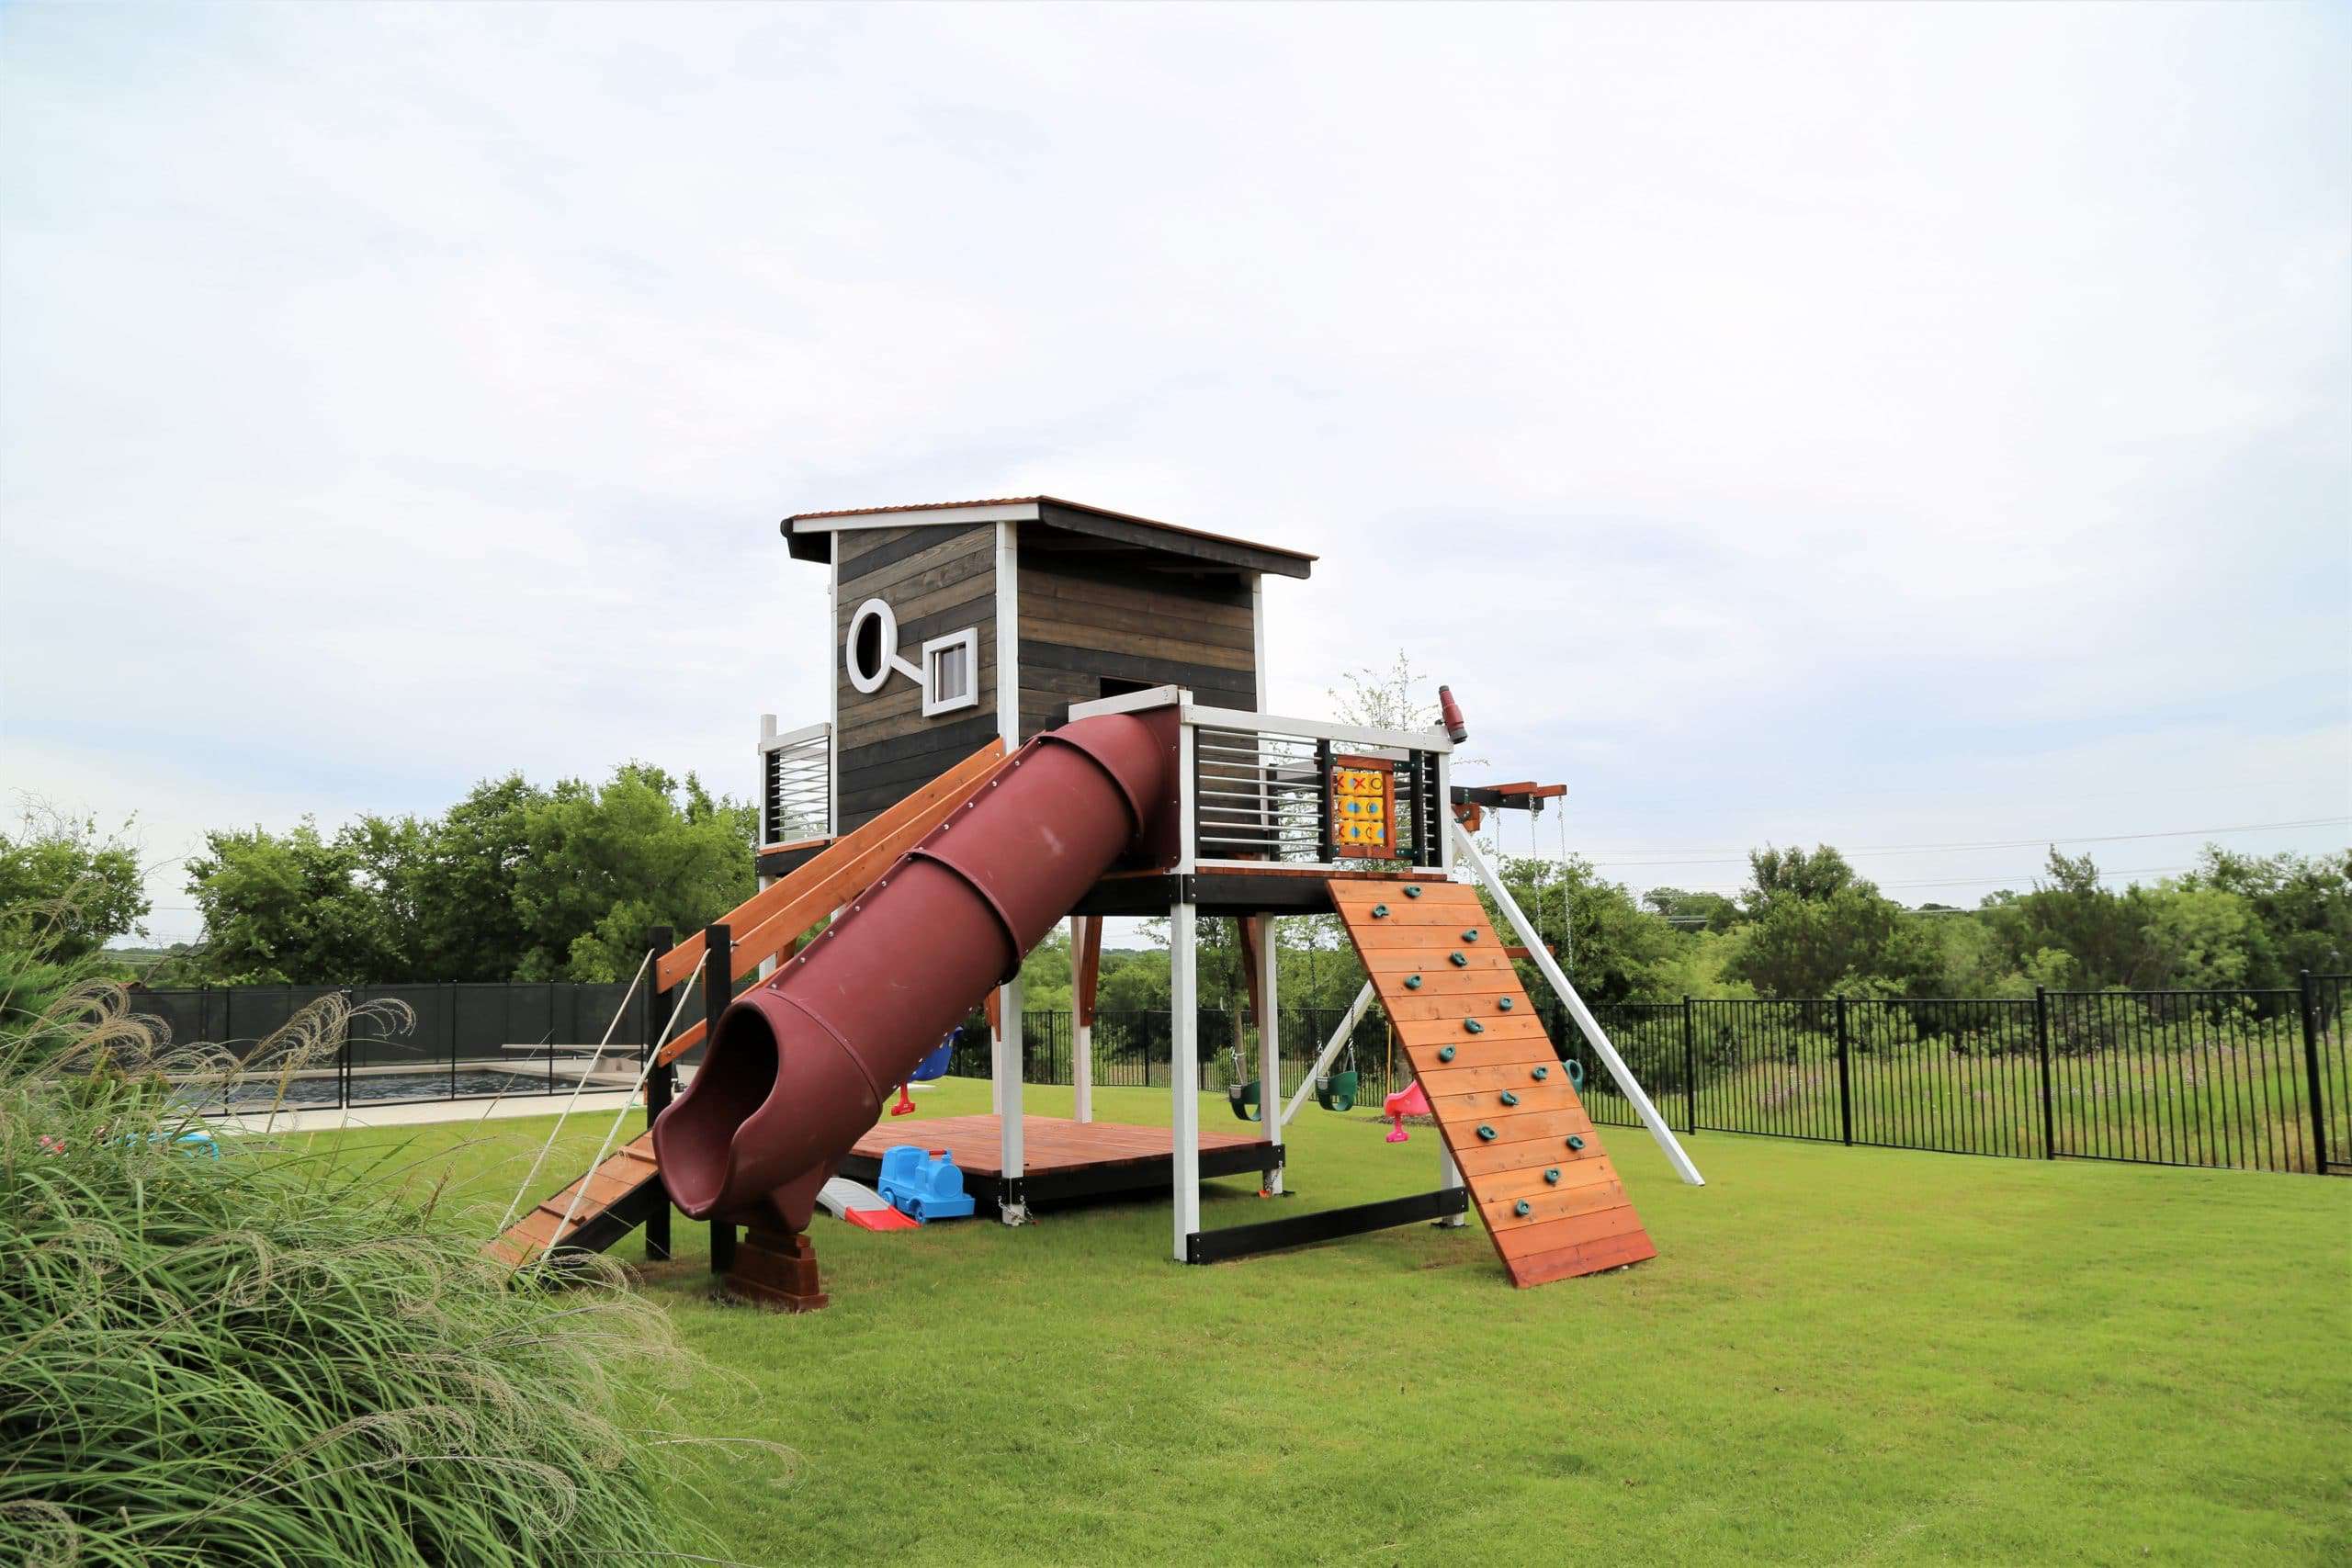 modern playset, new swing sets, with slant roof and artsy windows, tube slide, rock walls, swings